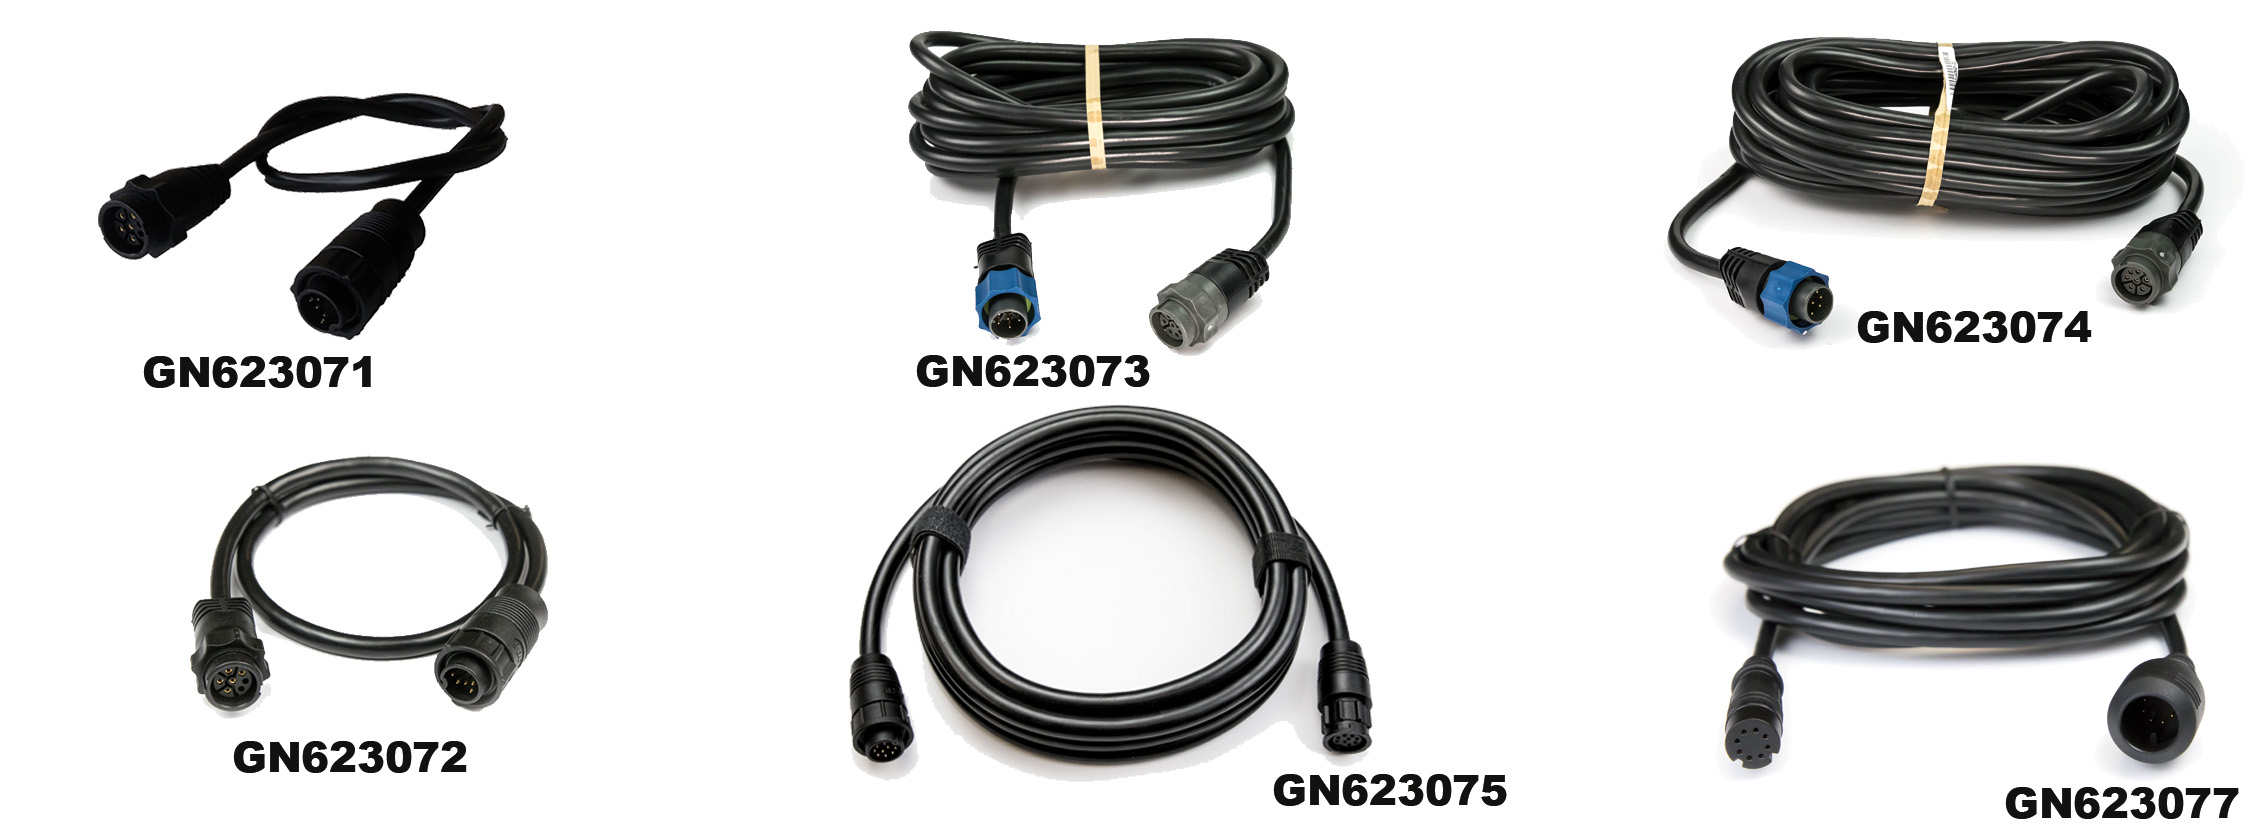 ADAPTER AND EXTENSION CABLES - G.F.N. Gibellato Forniture Nautiche